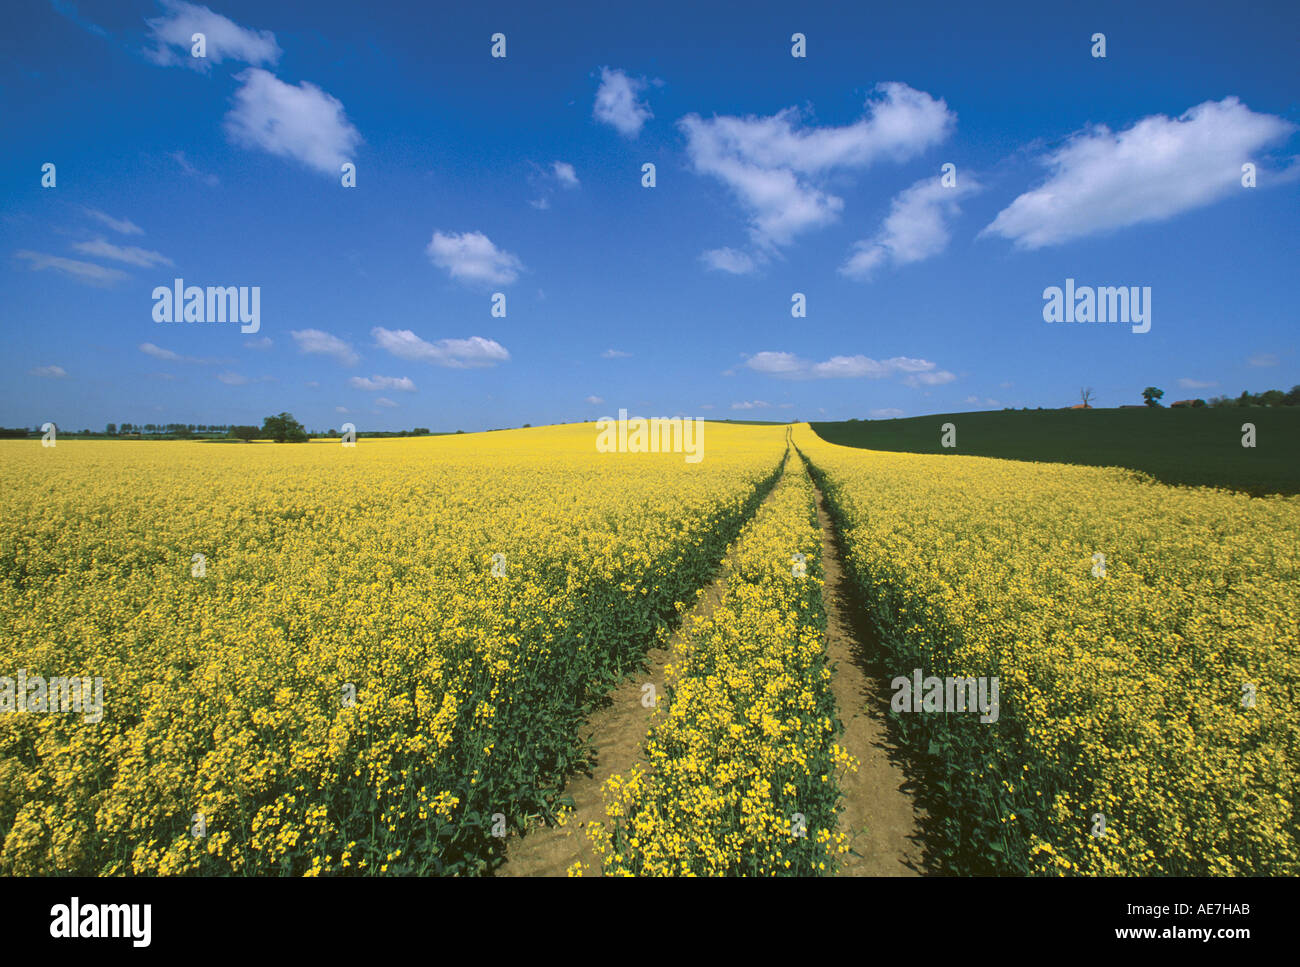 Field of of Rape Modern agriculture methods leave tractor tracks through the crops Near Cavendish Stock Photo